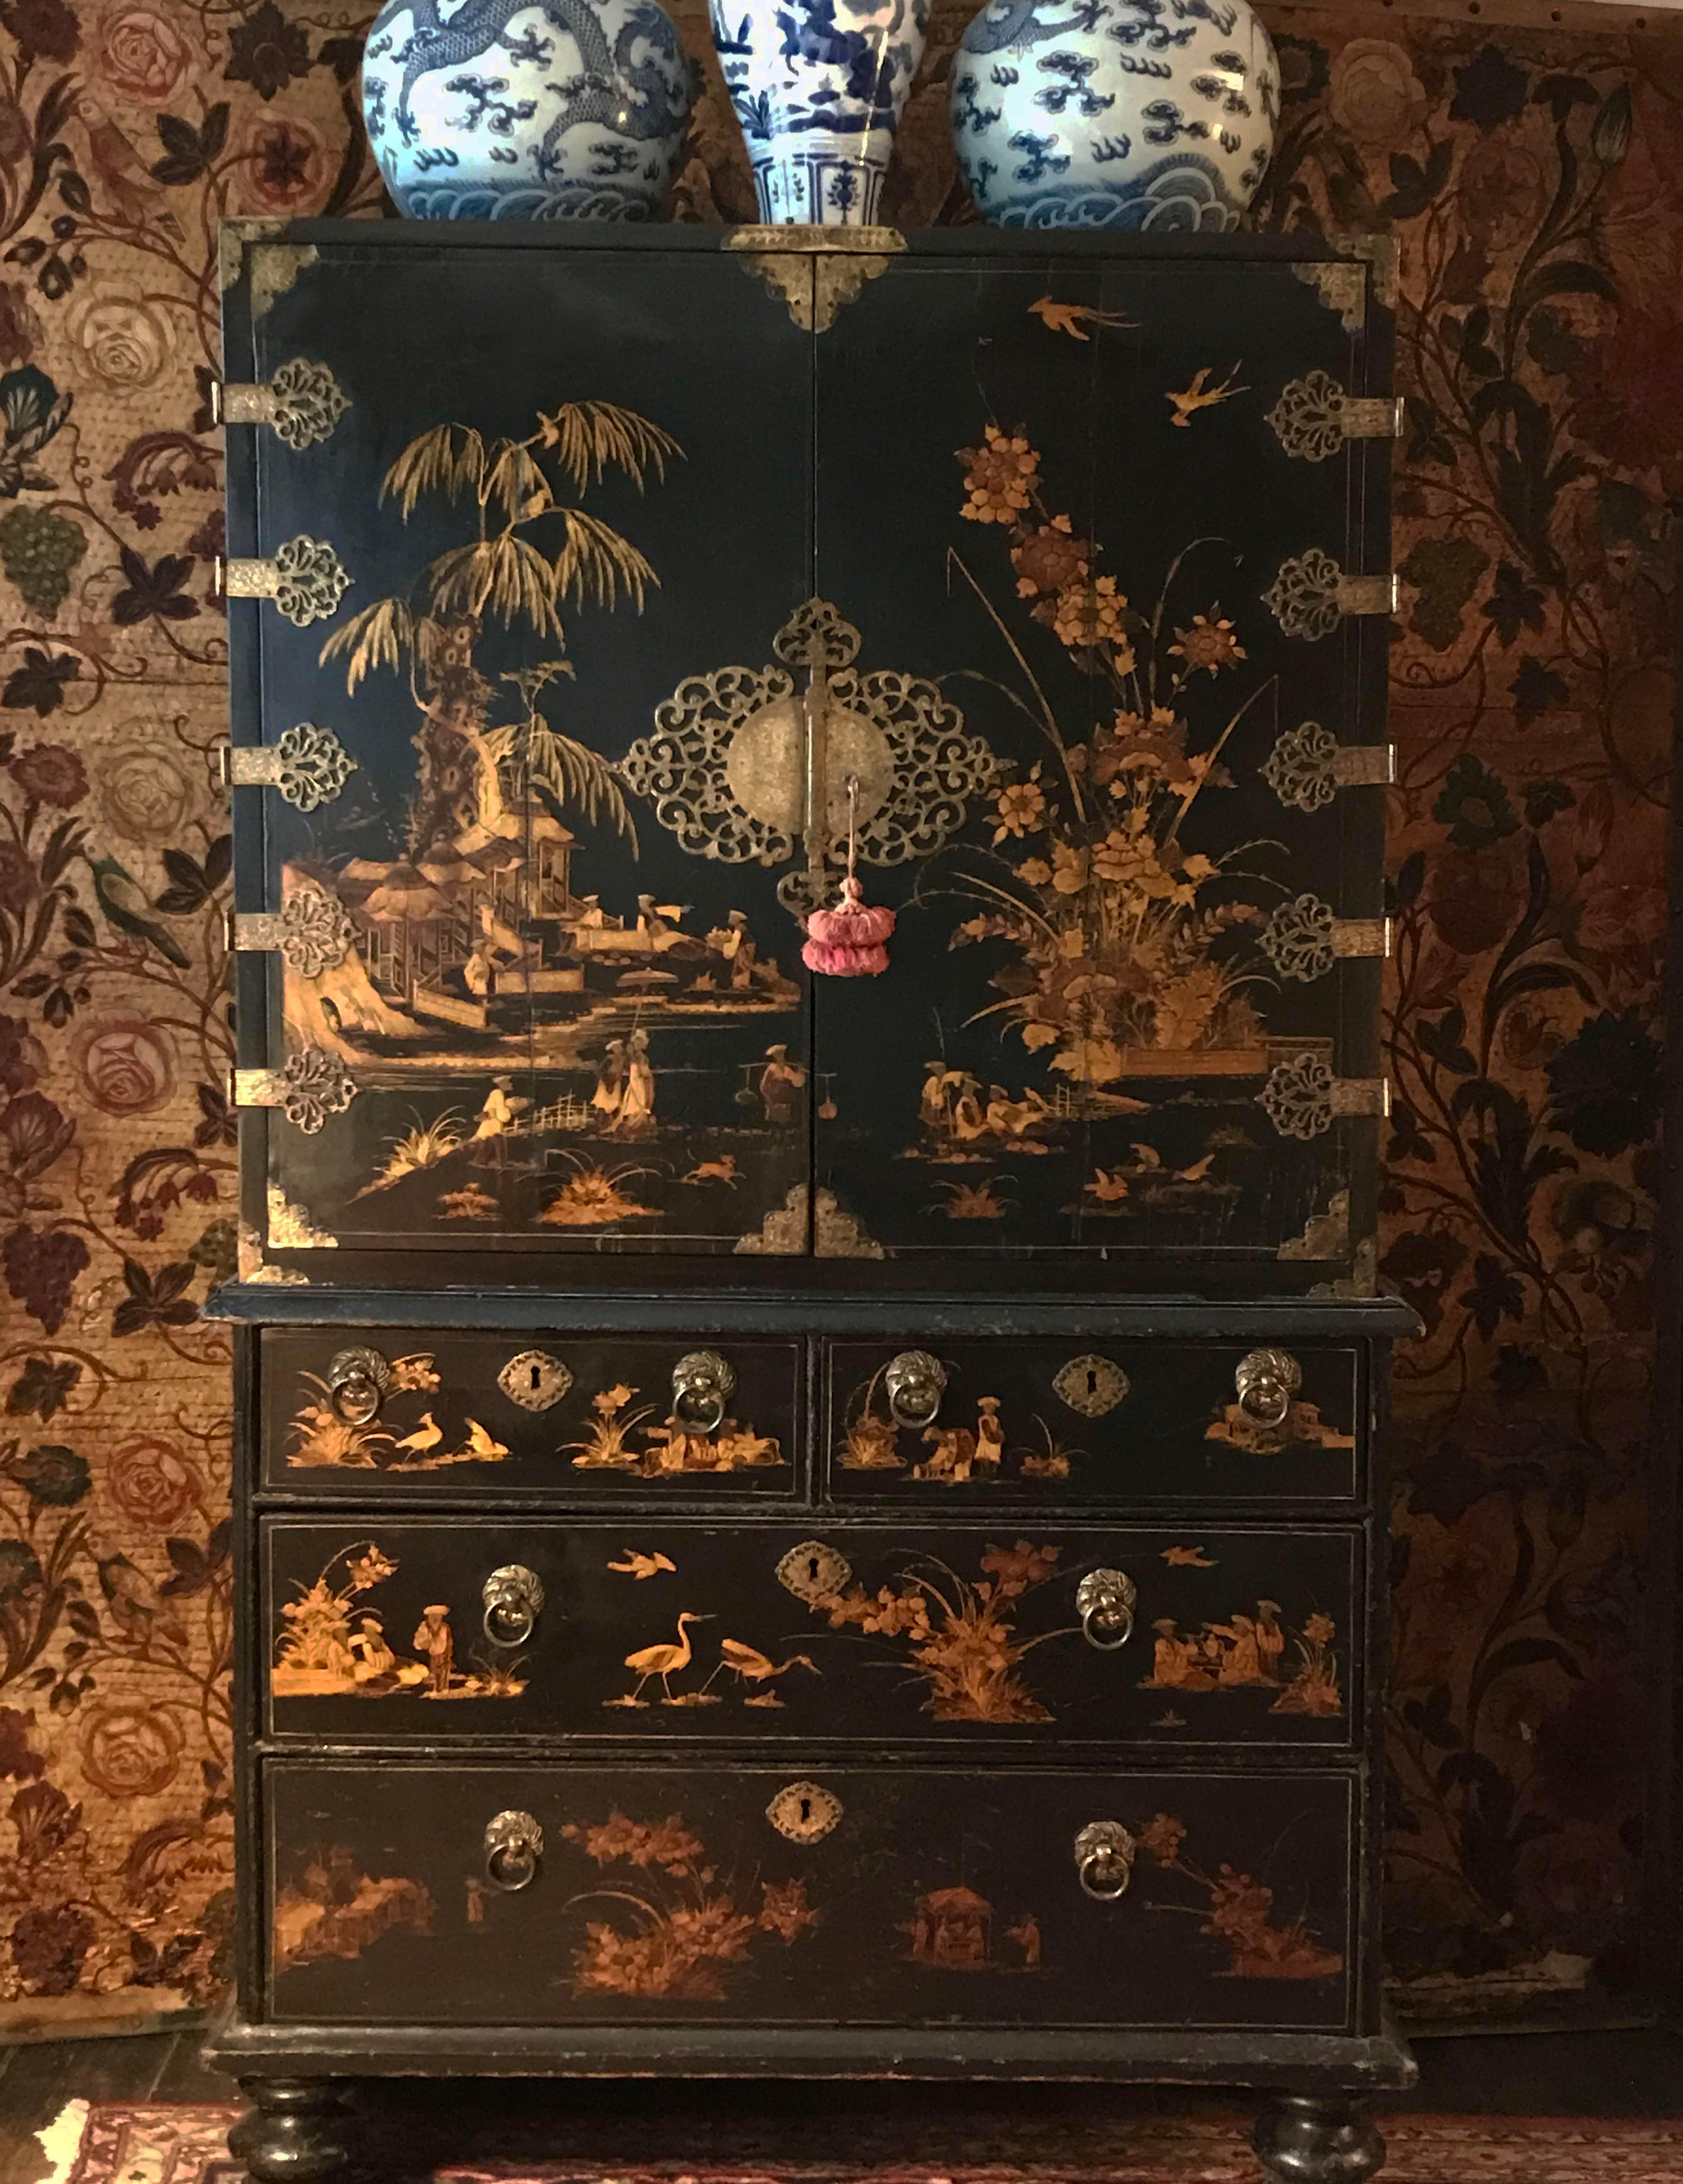 An exceptional English japanned / lacquer cabinet. William & Mary period, ca. 1690.

The top section having doors with finely engraved shaped filigree gilt hinges and lock plates, enclosing an arrangement of fitted drawers. The base with two short